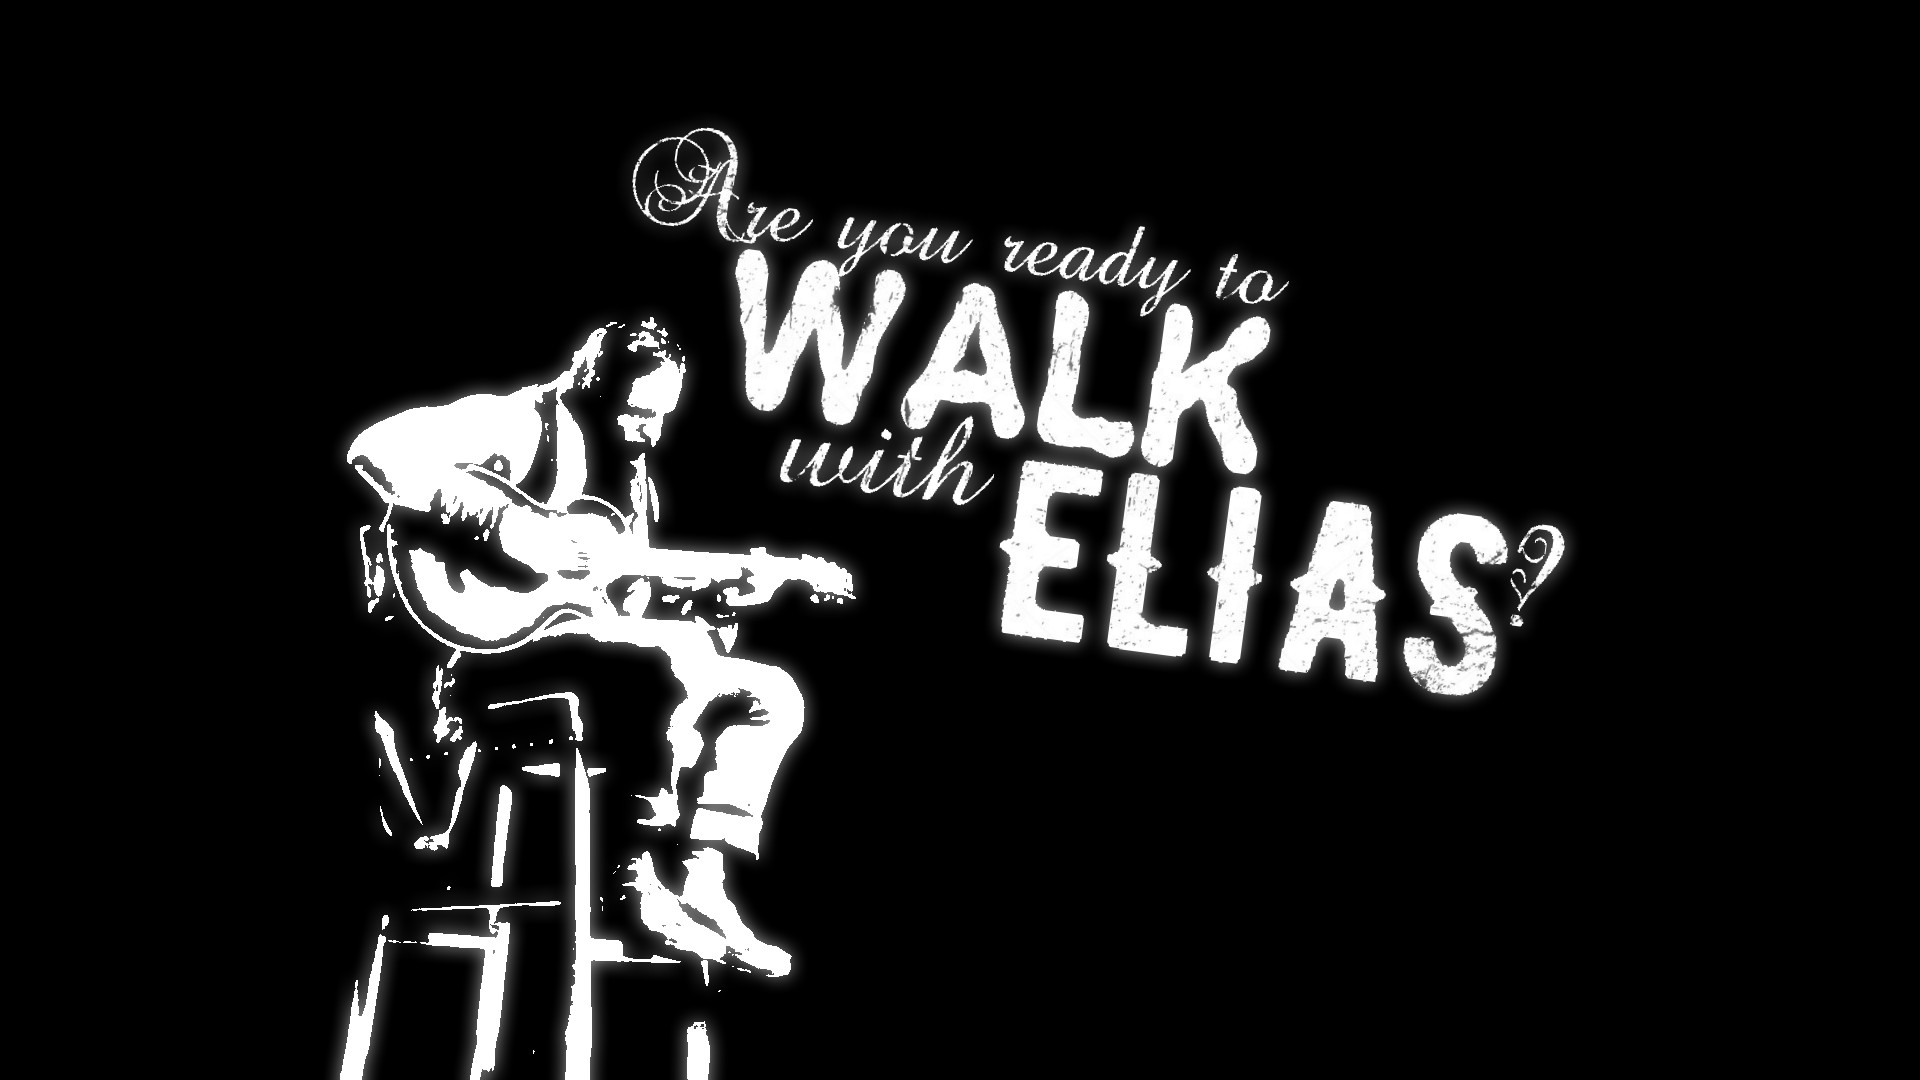 Are you ready to Walk With Elias? [ARTWORK]